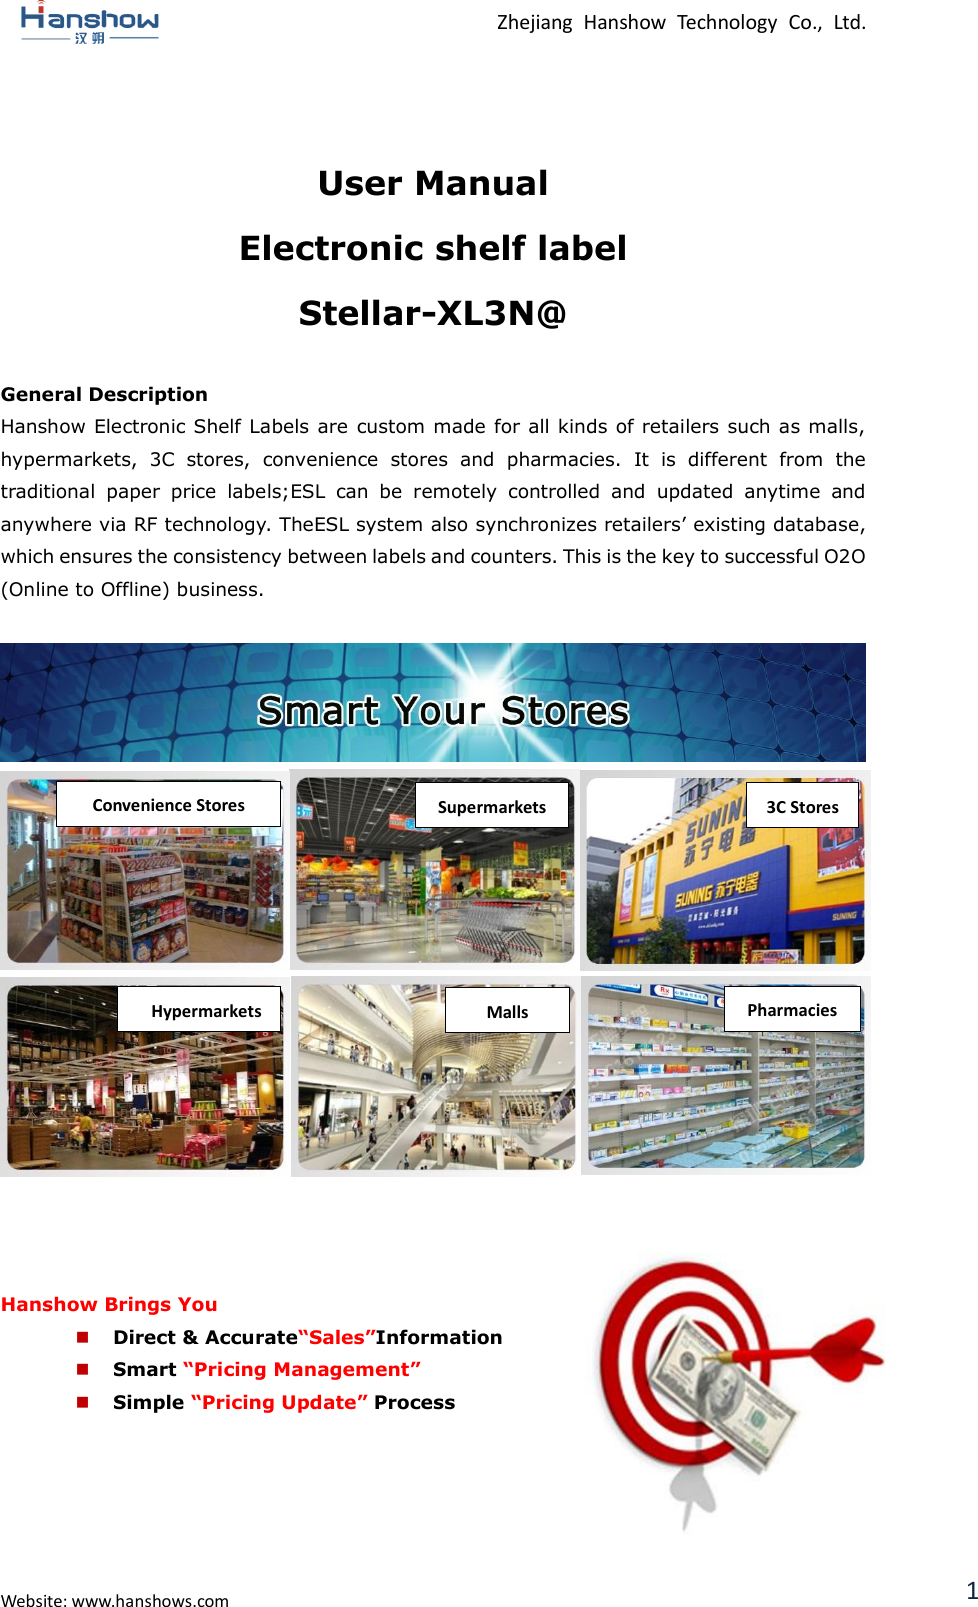  Zhejiang  Hanshow  Technology  Co.,  Ltd.   Website: www.hanshows.com 1  User Manual Electronic shelf label Stellar-XL3N@  General Description Hanshow Electronic Shelf Labels are custom made for all kinds of retailers such as malls, hypermarkets,  3C  stores,  convenience  stores  and  pharmacies.  It  is  different  from  the traditional  paper  price  labels;ESL  can  be  remotely  controlled  and  updated  anytime  and anywhere via RF technology. TheESL system also synchronizes retailers’ existing database, which ensures the consistency between labels and counters. This is the key to successful O2O (Online to Offline) business.                     Hanshow Brings You  Direct &amp; Accurate“Sales”Information  Smart “Pricing Management”  Simple “Pricing Update” Process      Convenience Stores Supermarkets 3C Stores Pharmacies Malls Hypermarkets G-MALL 